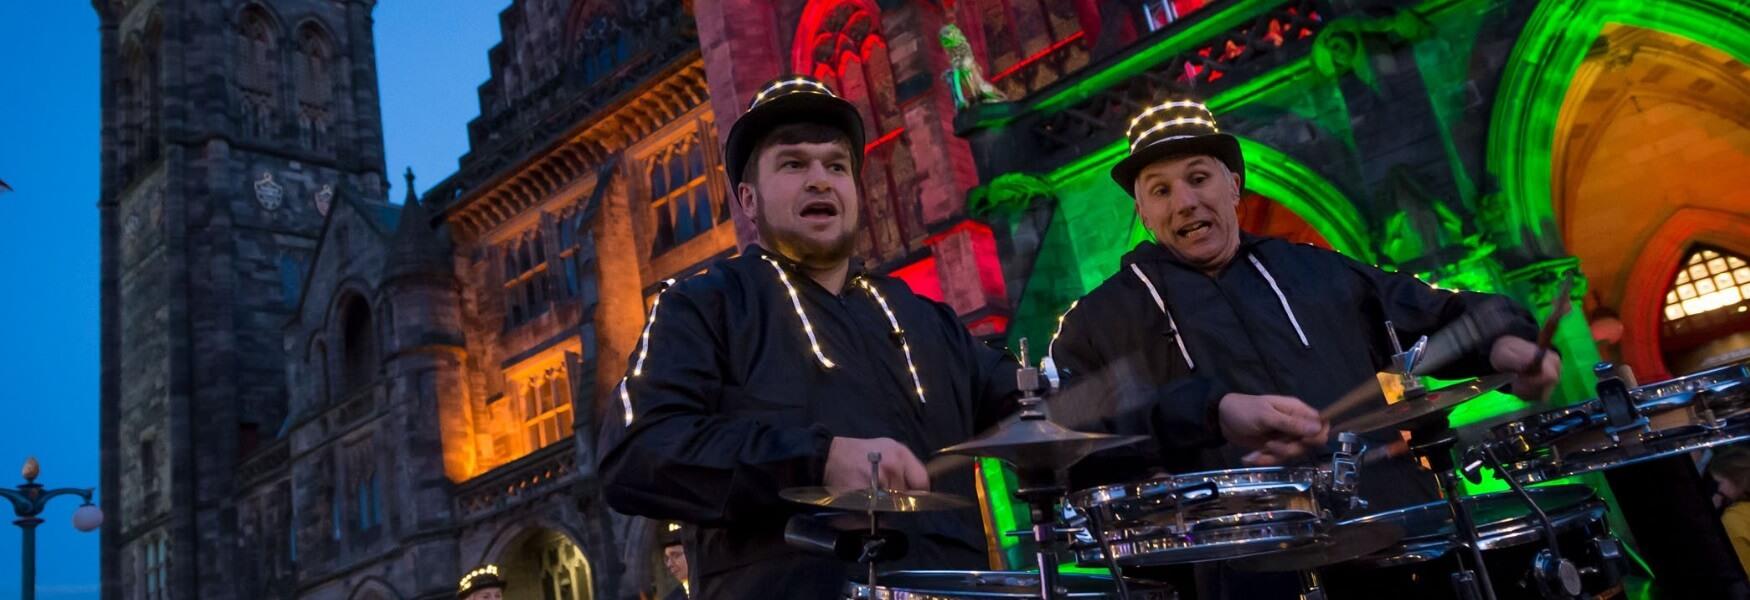 Two drummers at the Rochdale Christmas Lights 2018.